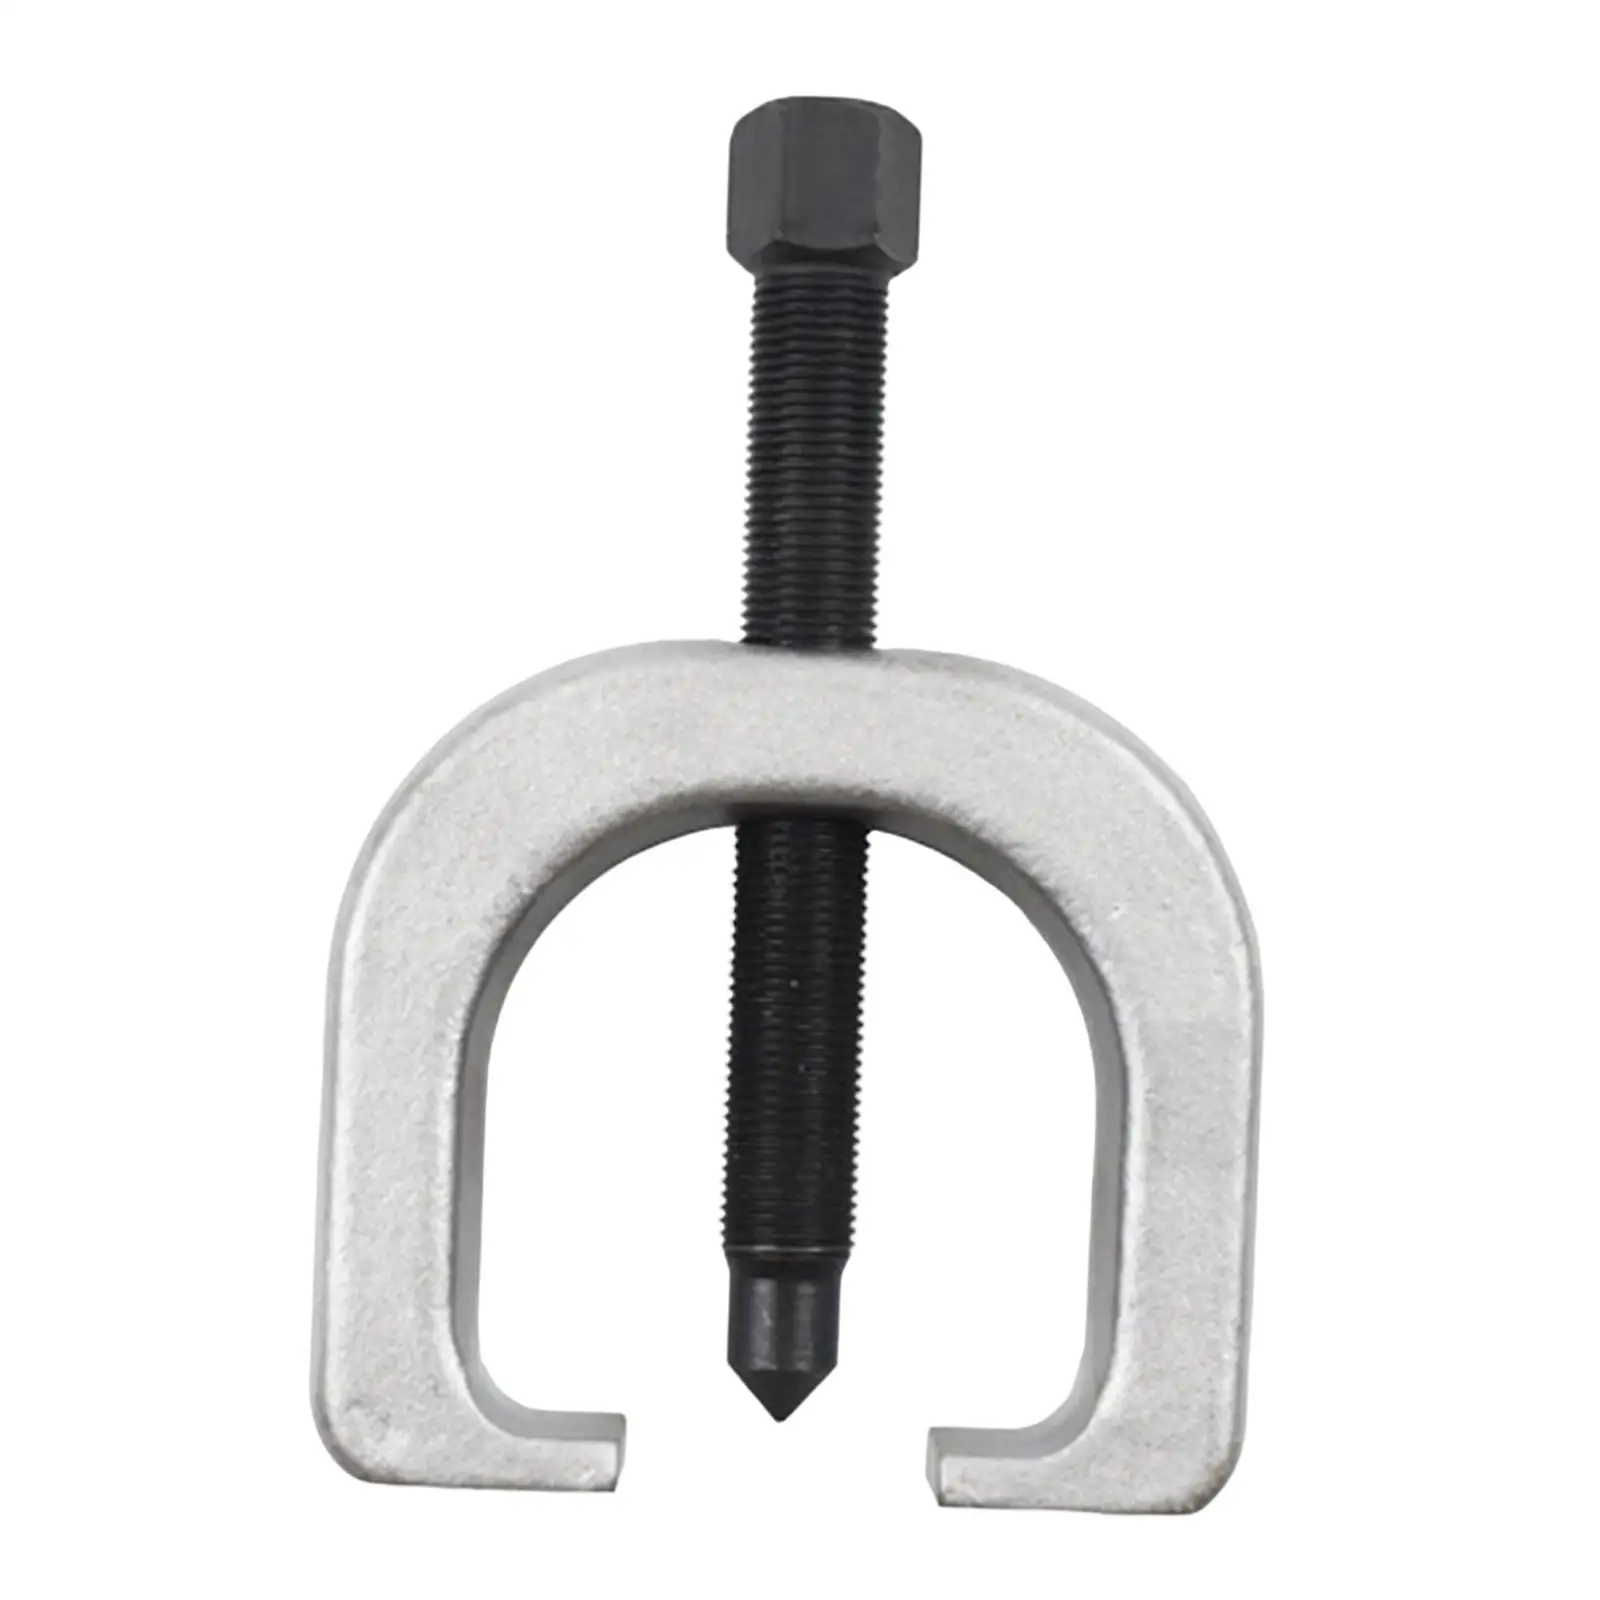 Slack Adjuster Puller Easy to Operate Compact Carbon Steel Repair Tool Removal Tool Maintenance Tool for Trucks Trailers